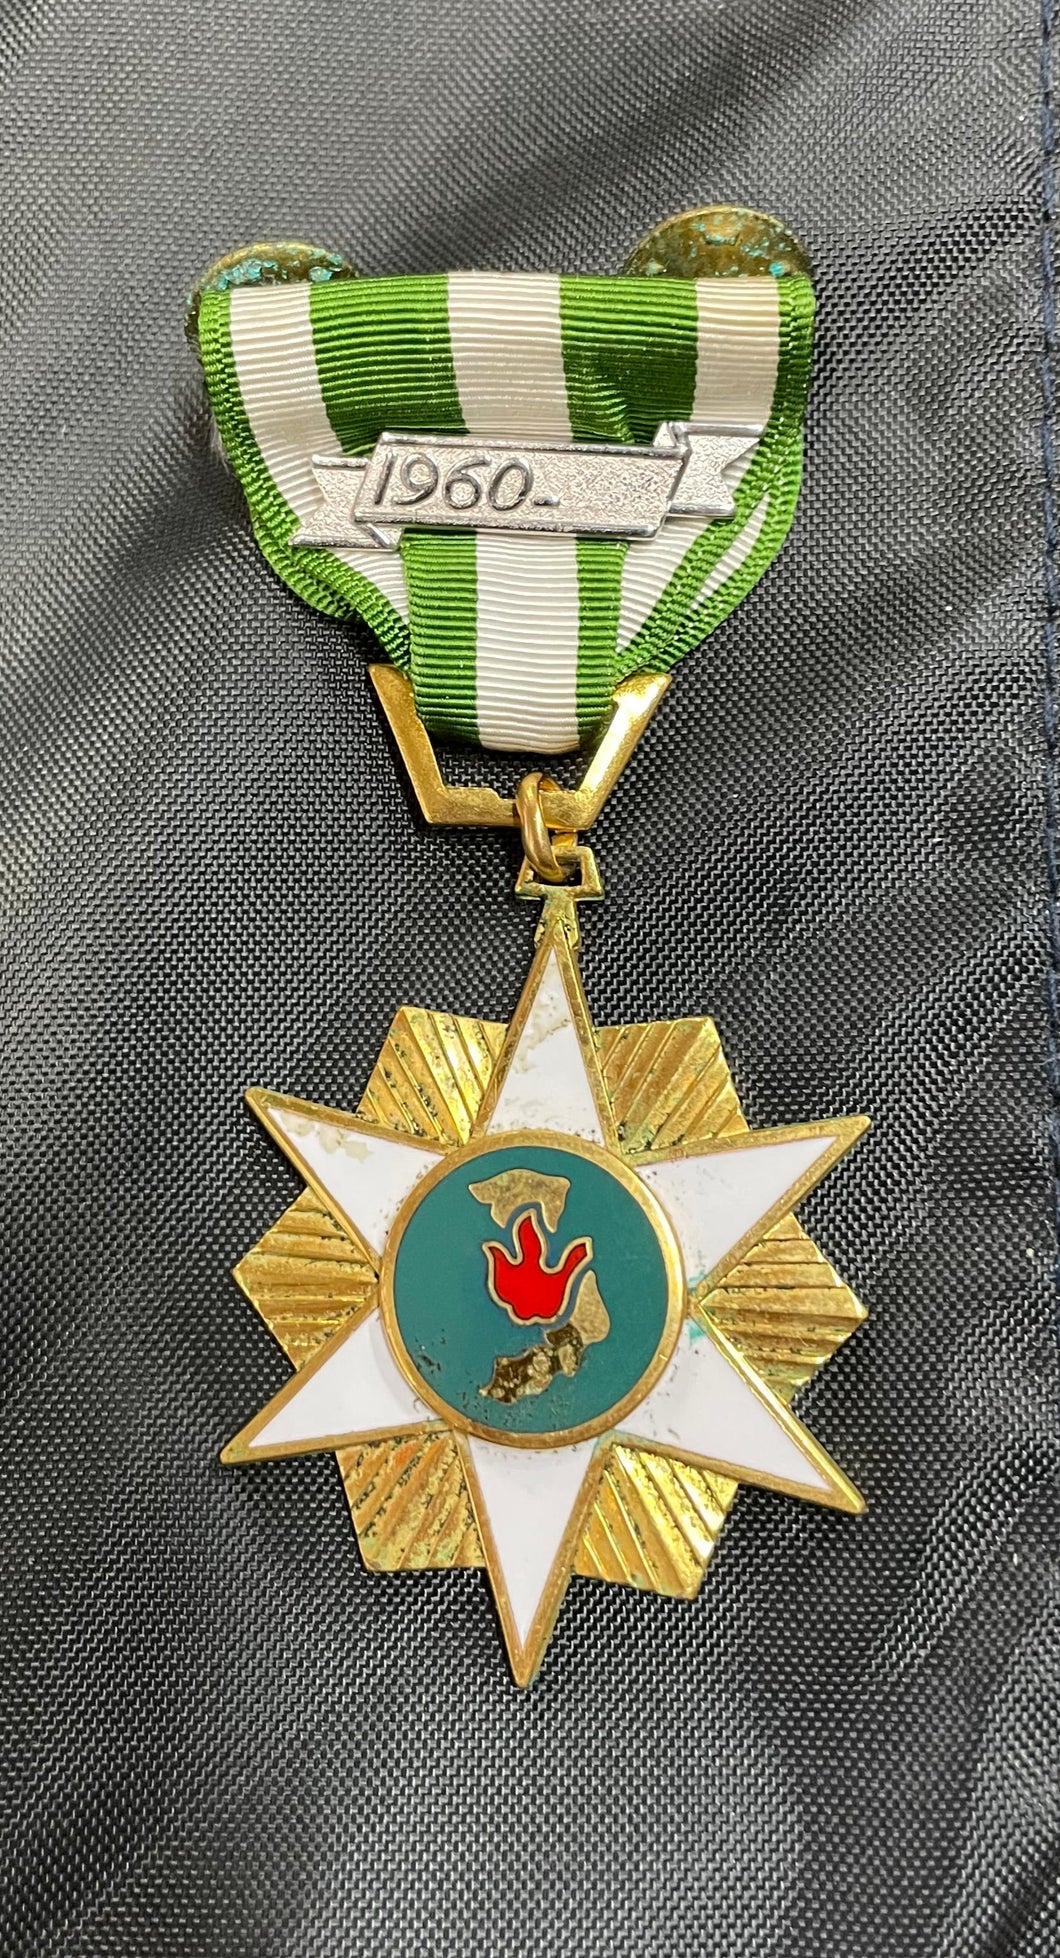 FRONT VIEW OF VIETNAM MEDAL